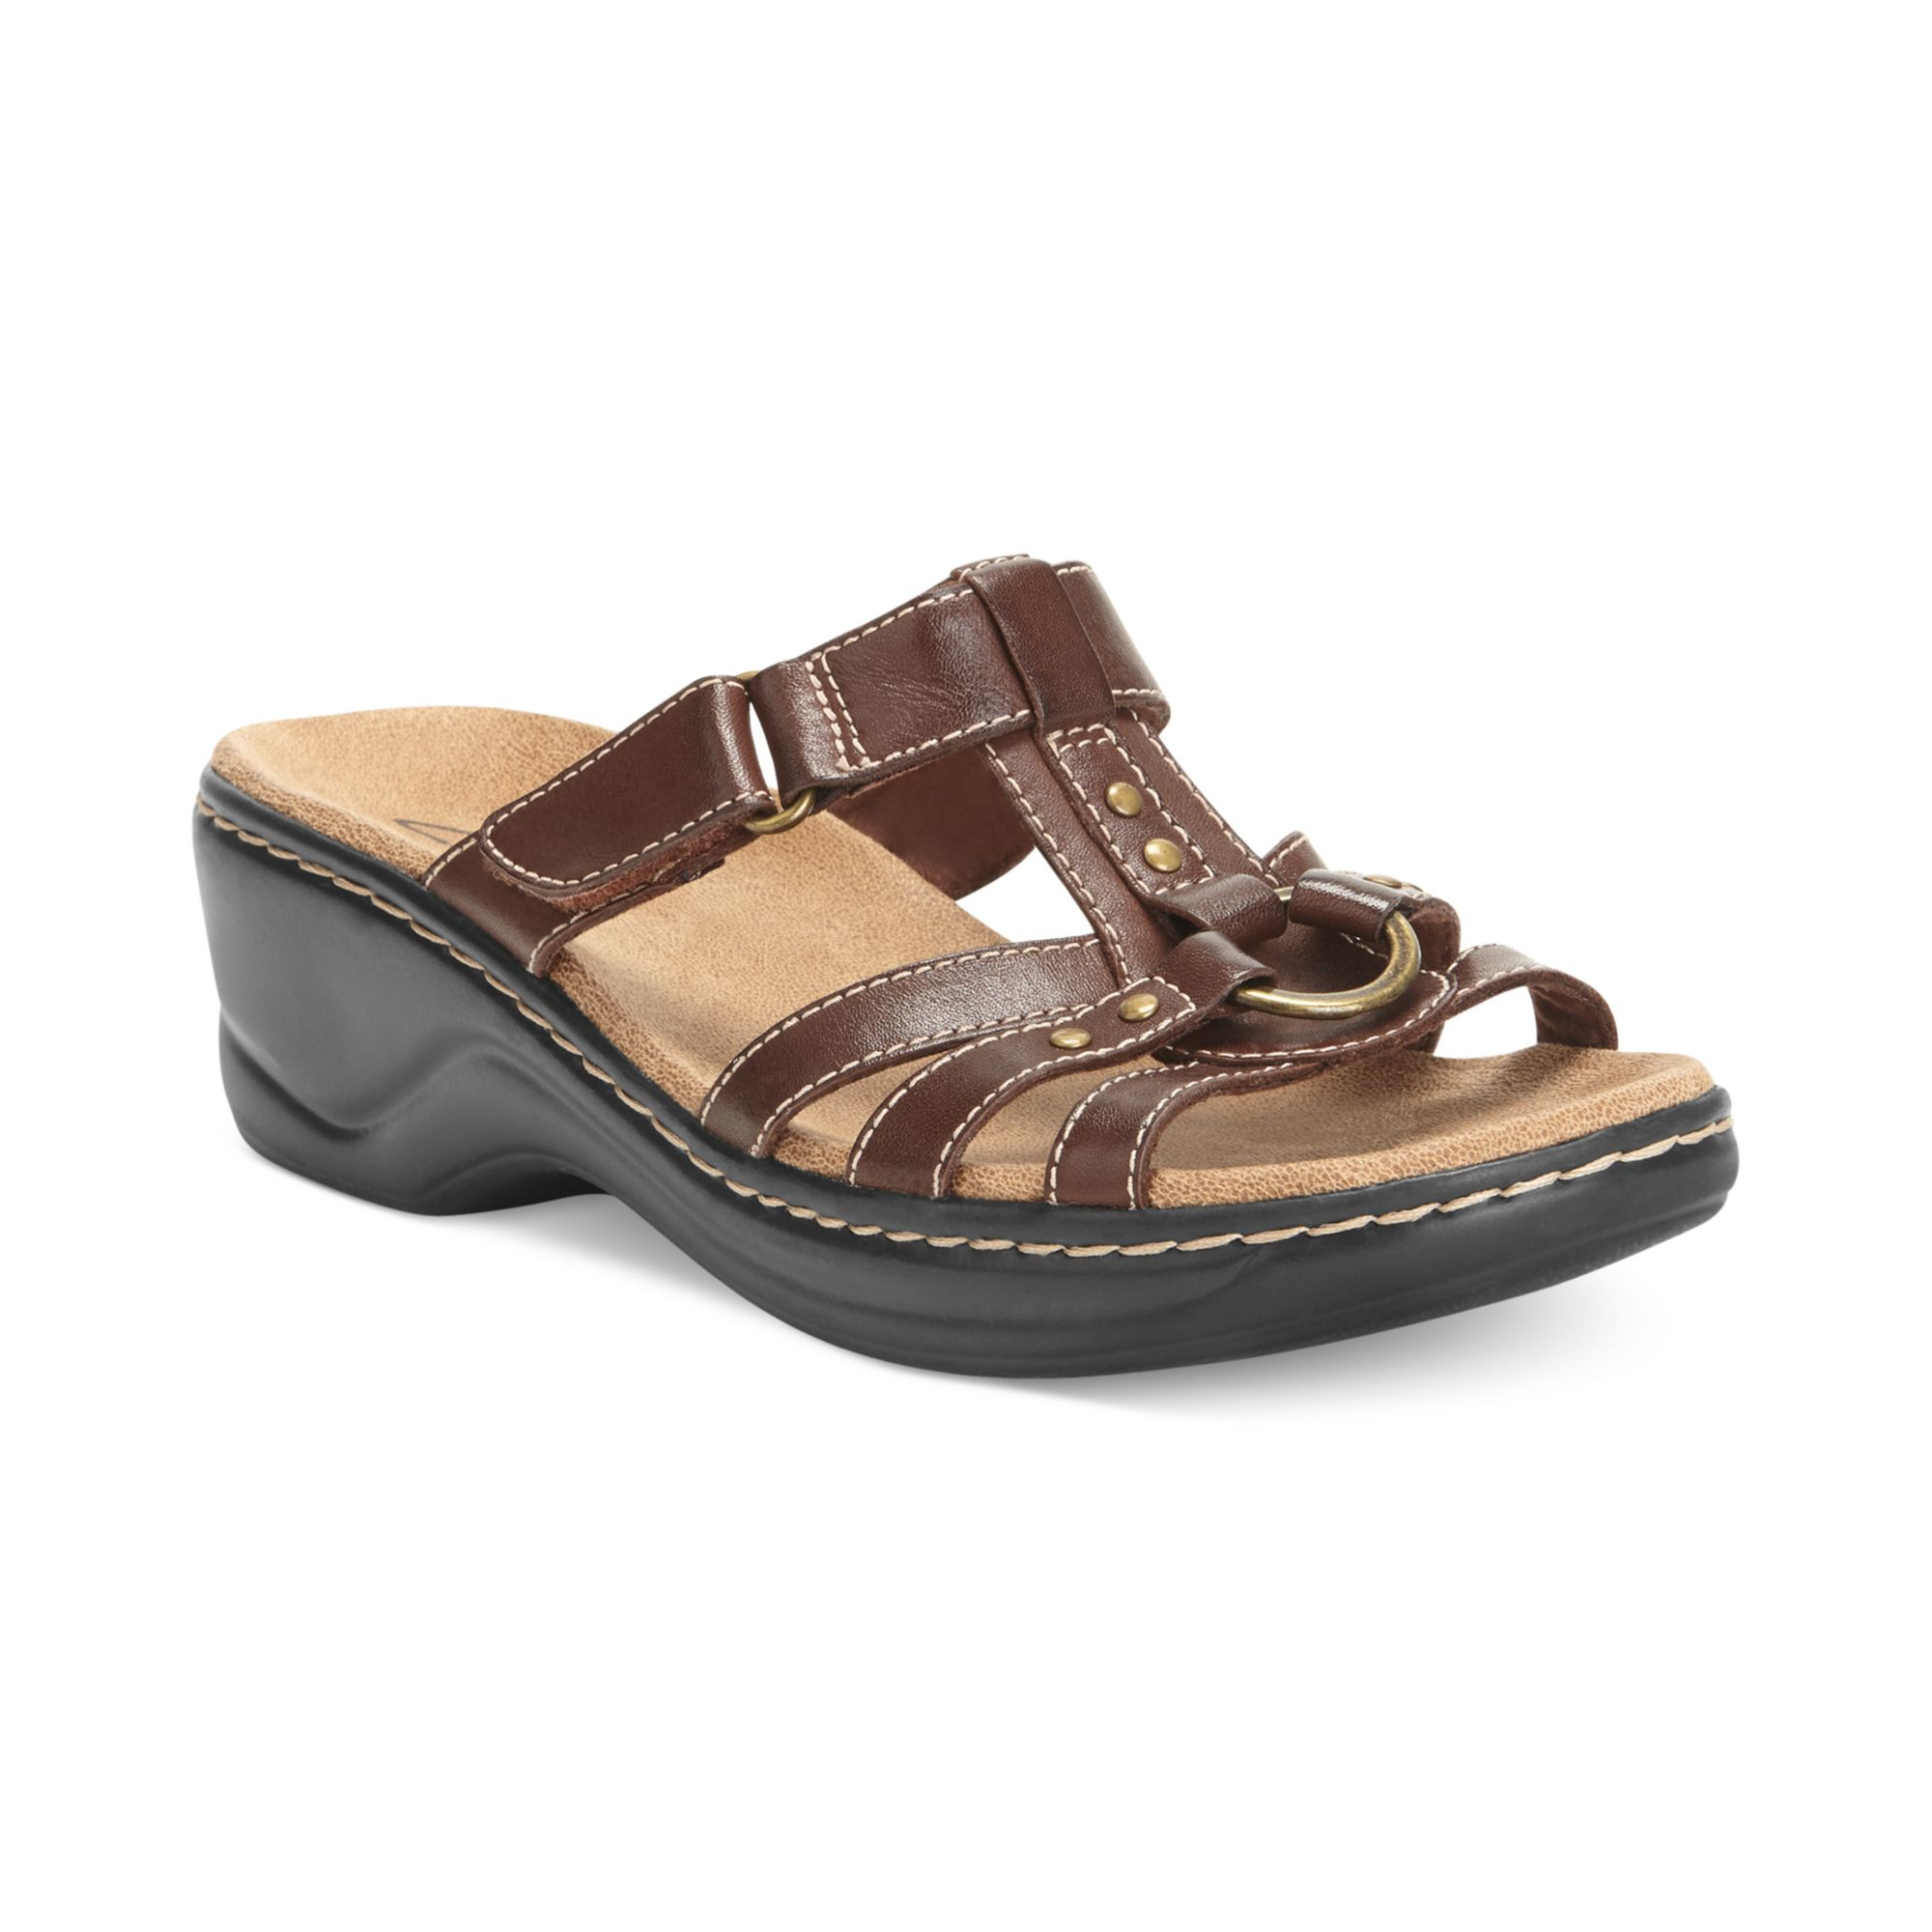 Clarks Womens Shoes Lexi Jasmine Sandals in Brown (Mink) | Lyst